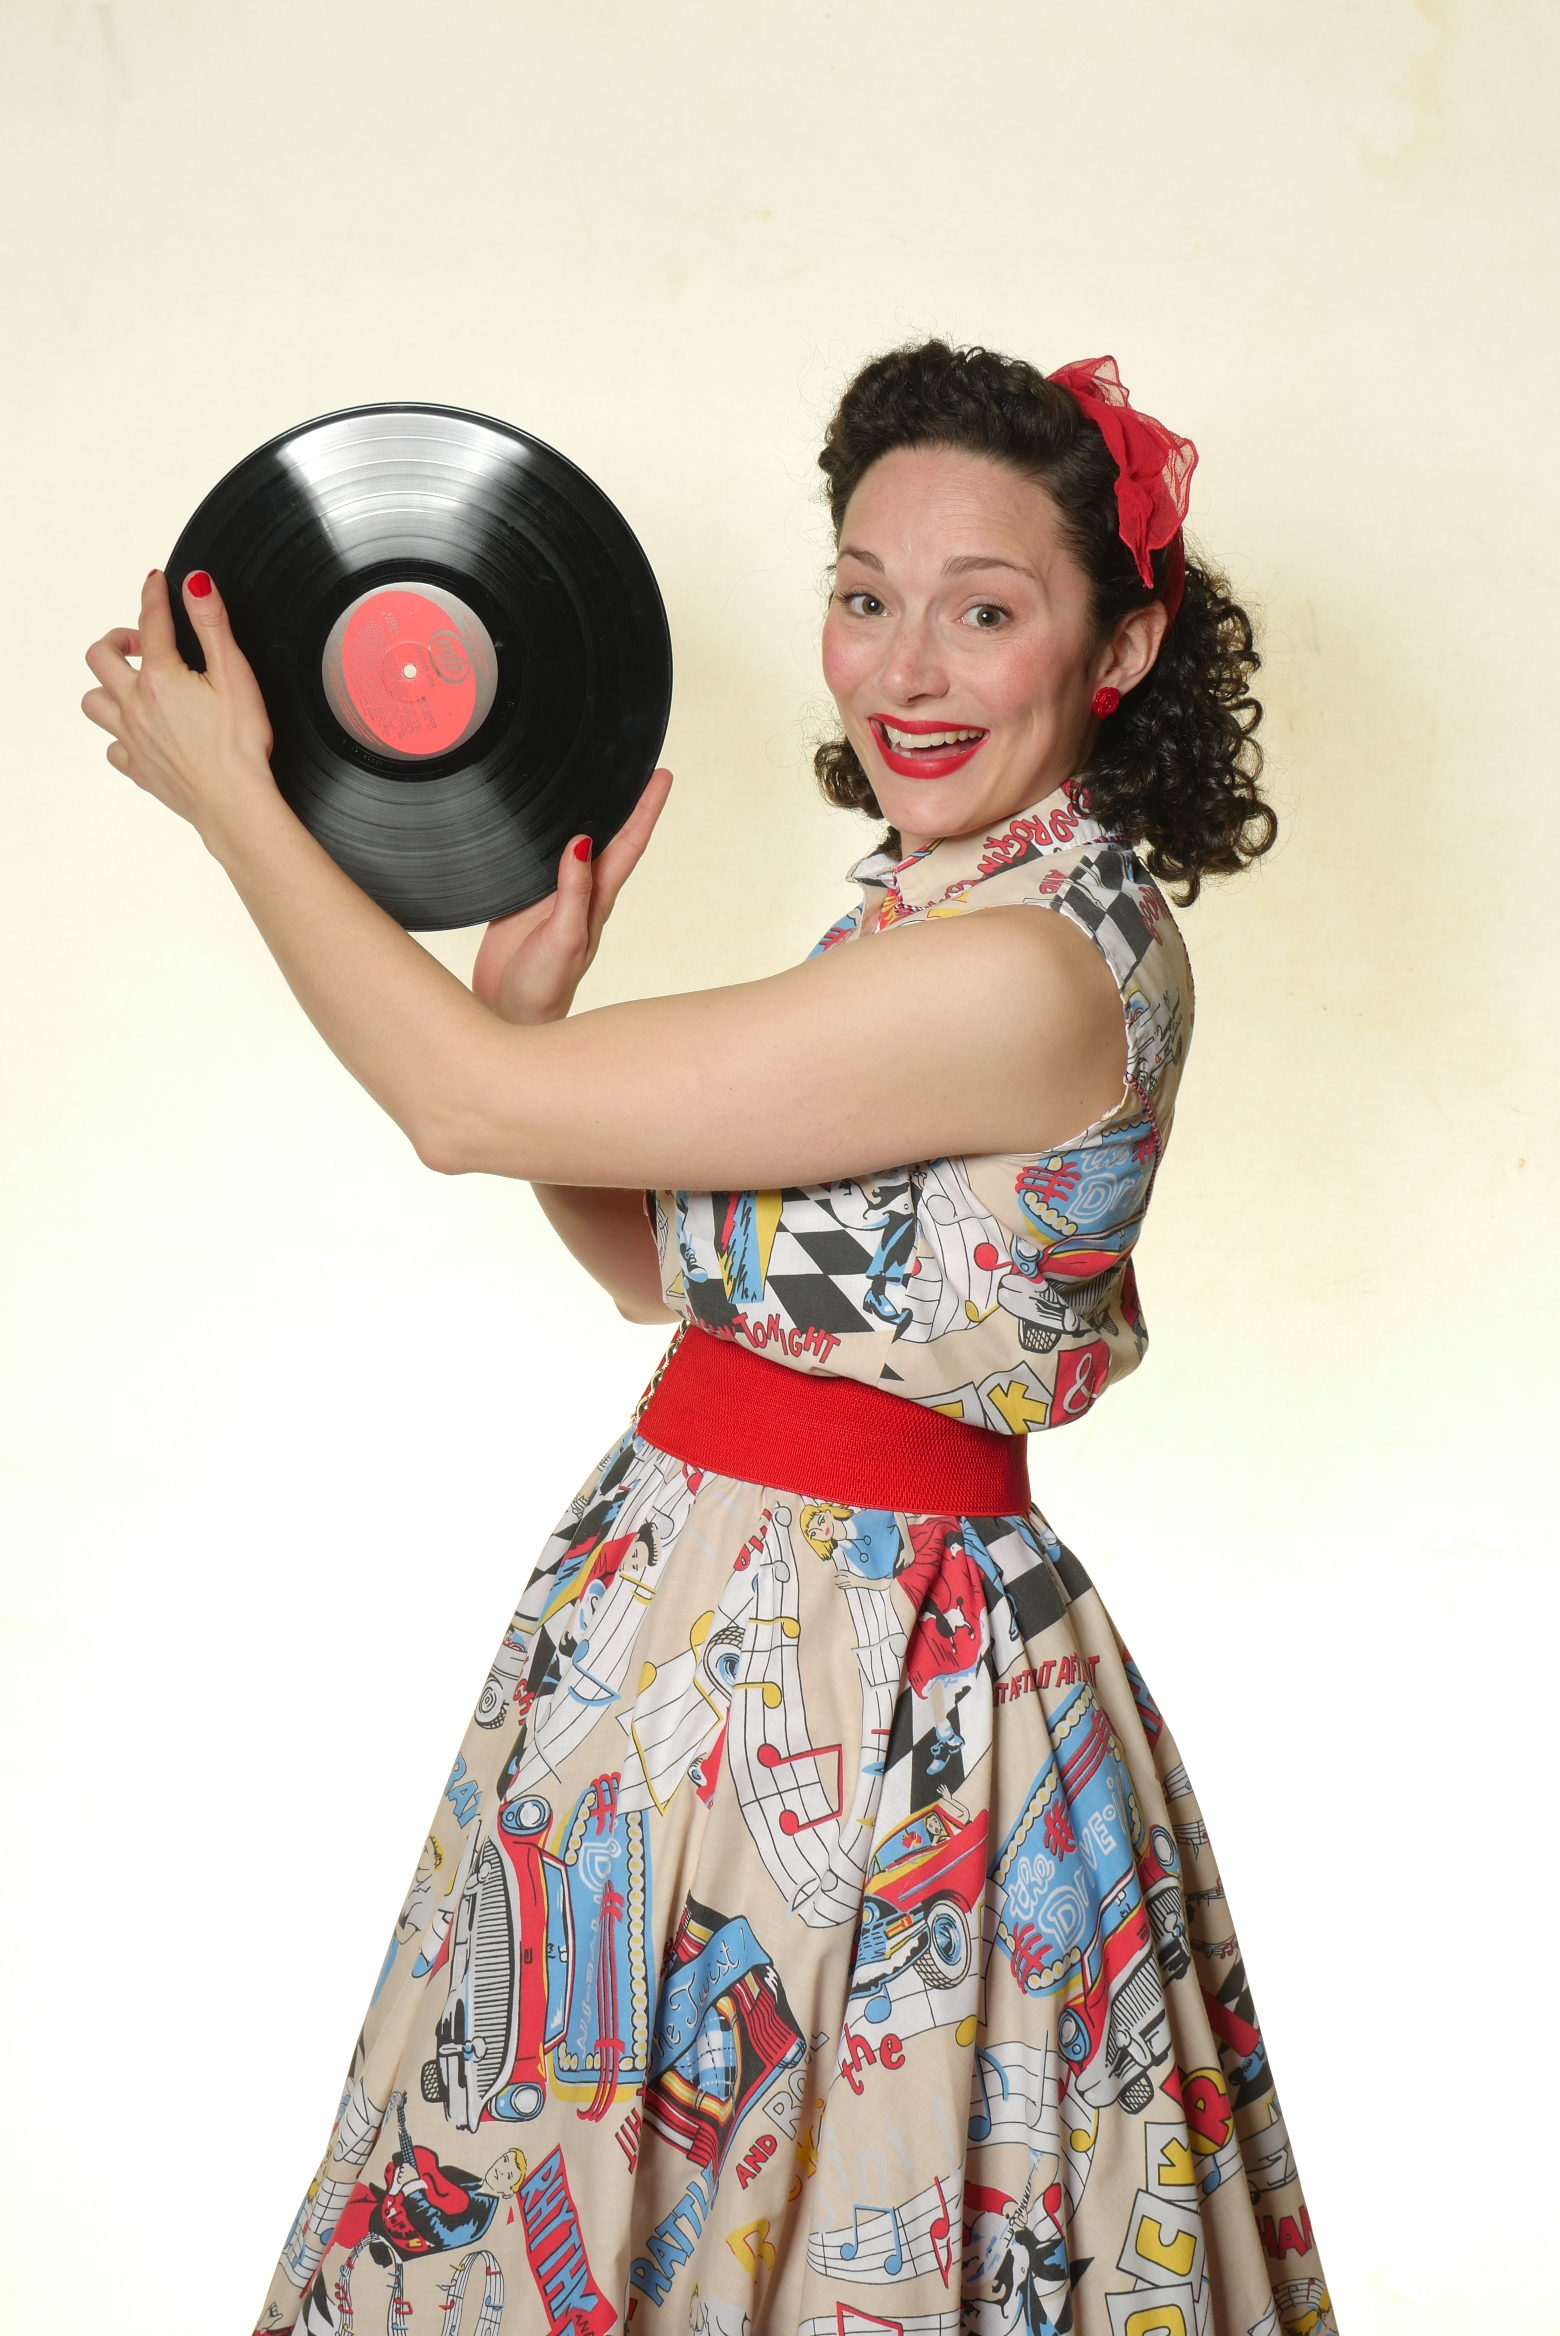 Rock n Roll 50's Art 2 Piece Top and Skirt Retro Costume